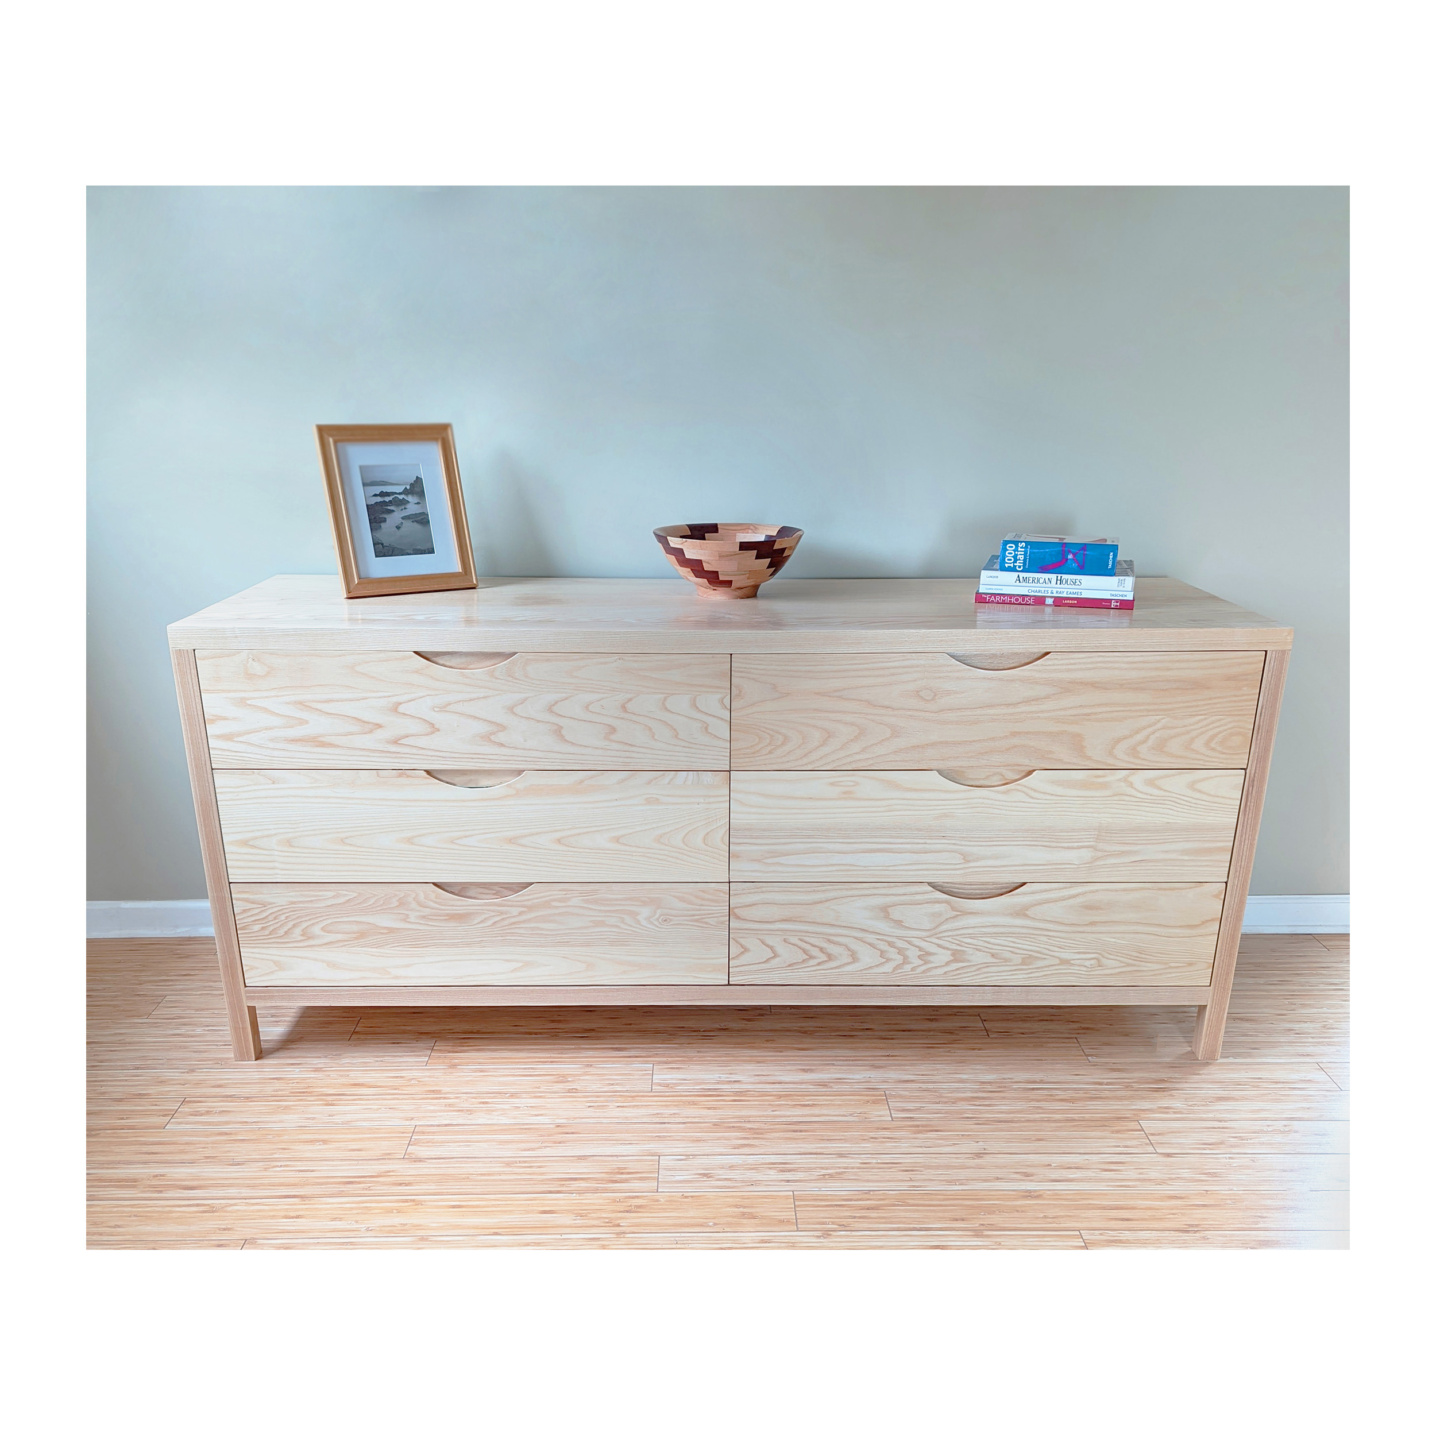 Solid Ash Dresser 72 inches in width